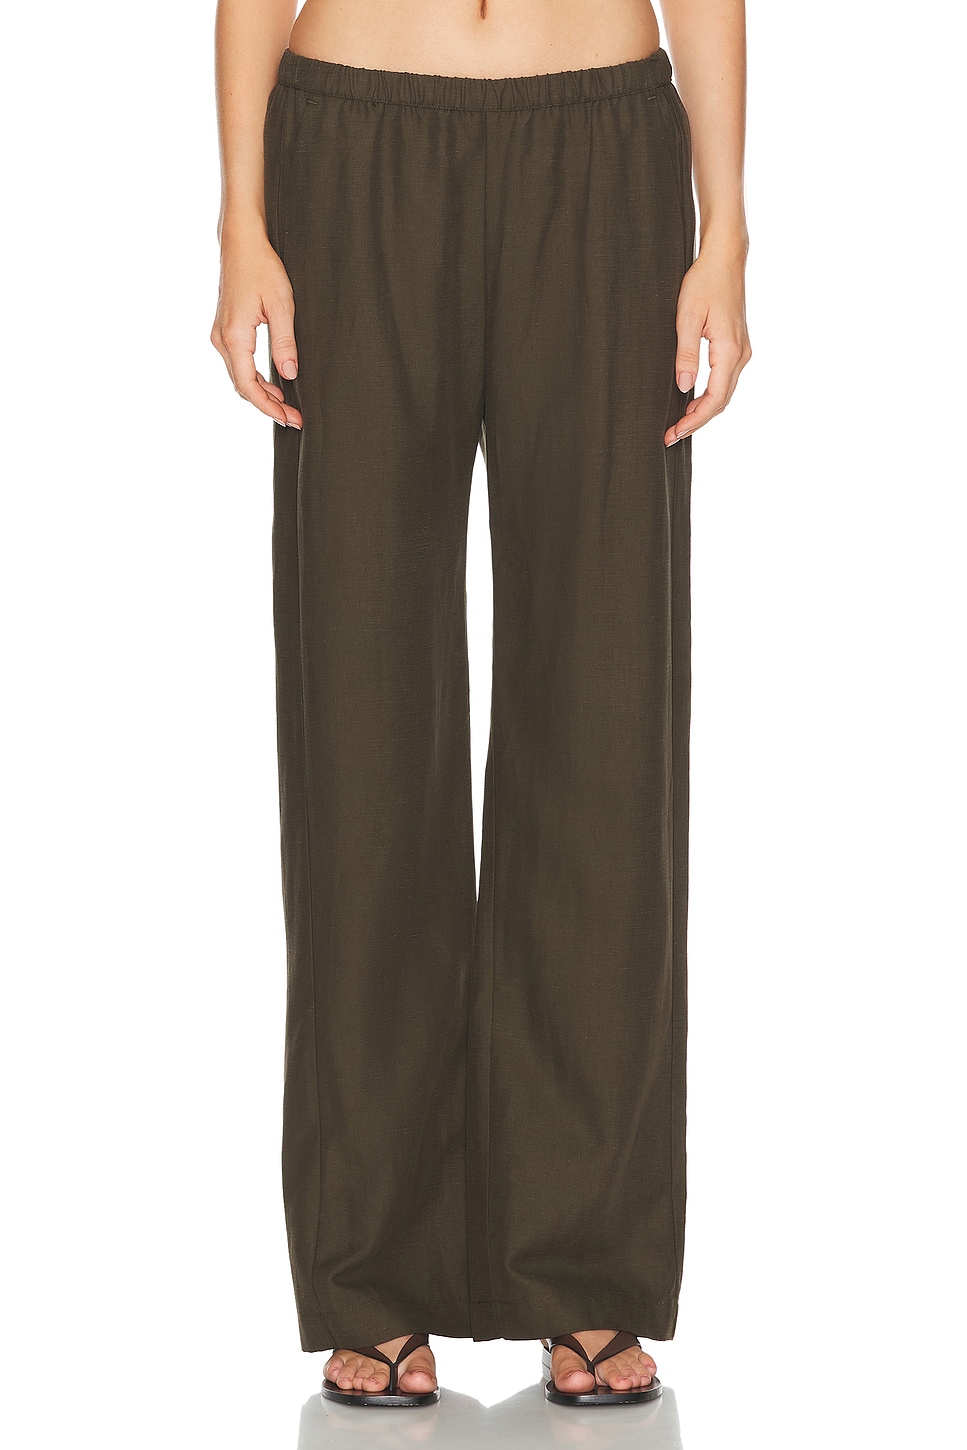 Image 1 of Enza Costa Twill Everywhere Pant in Military